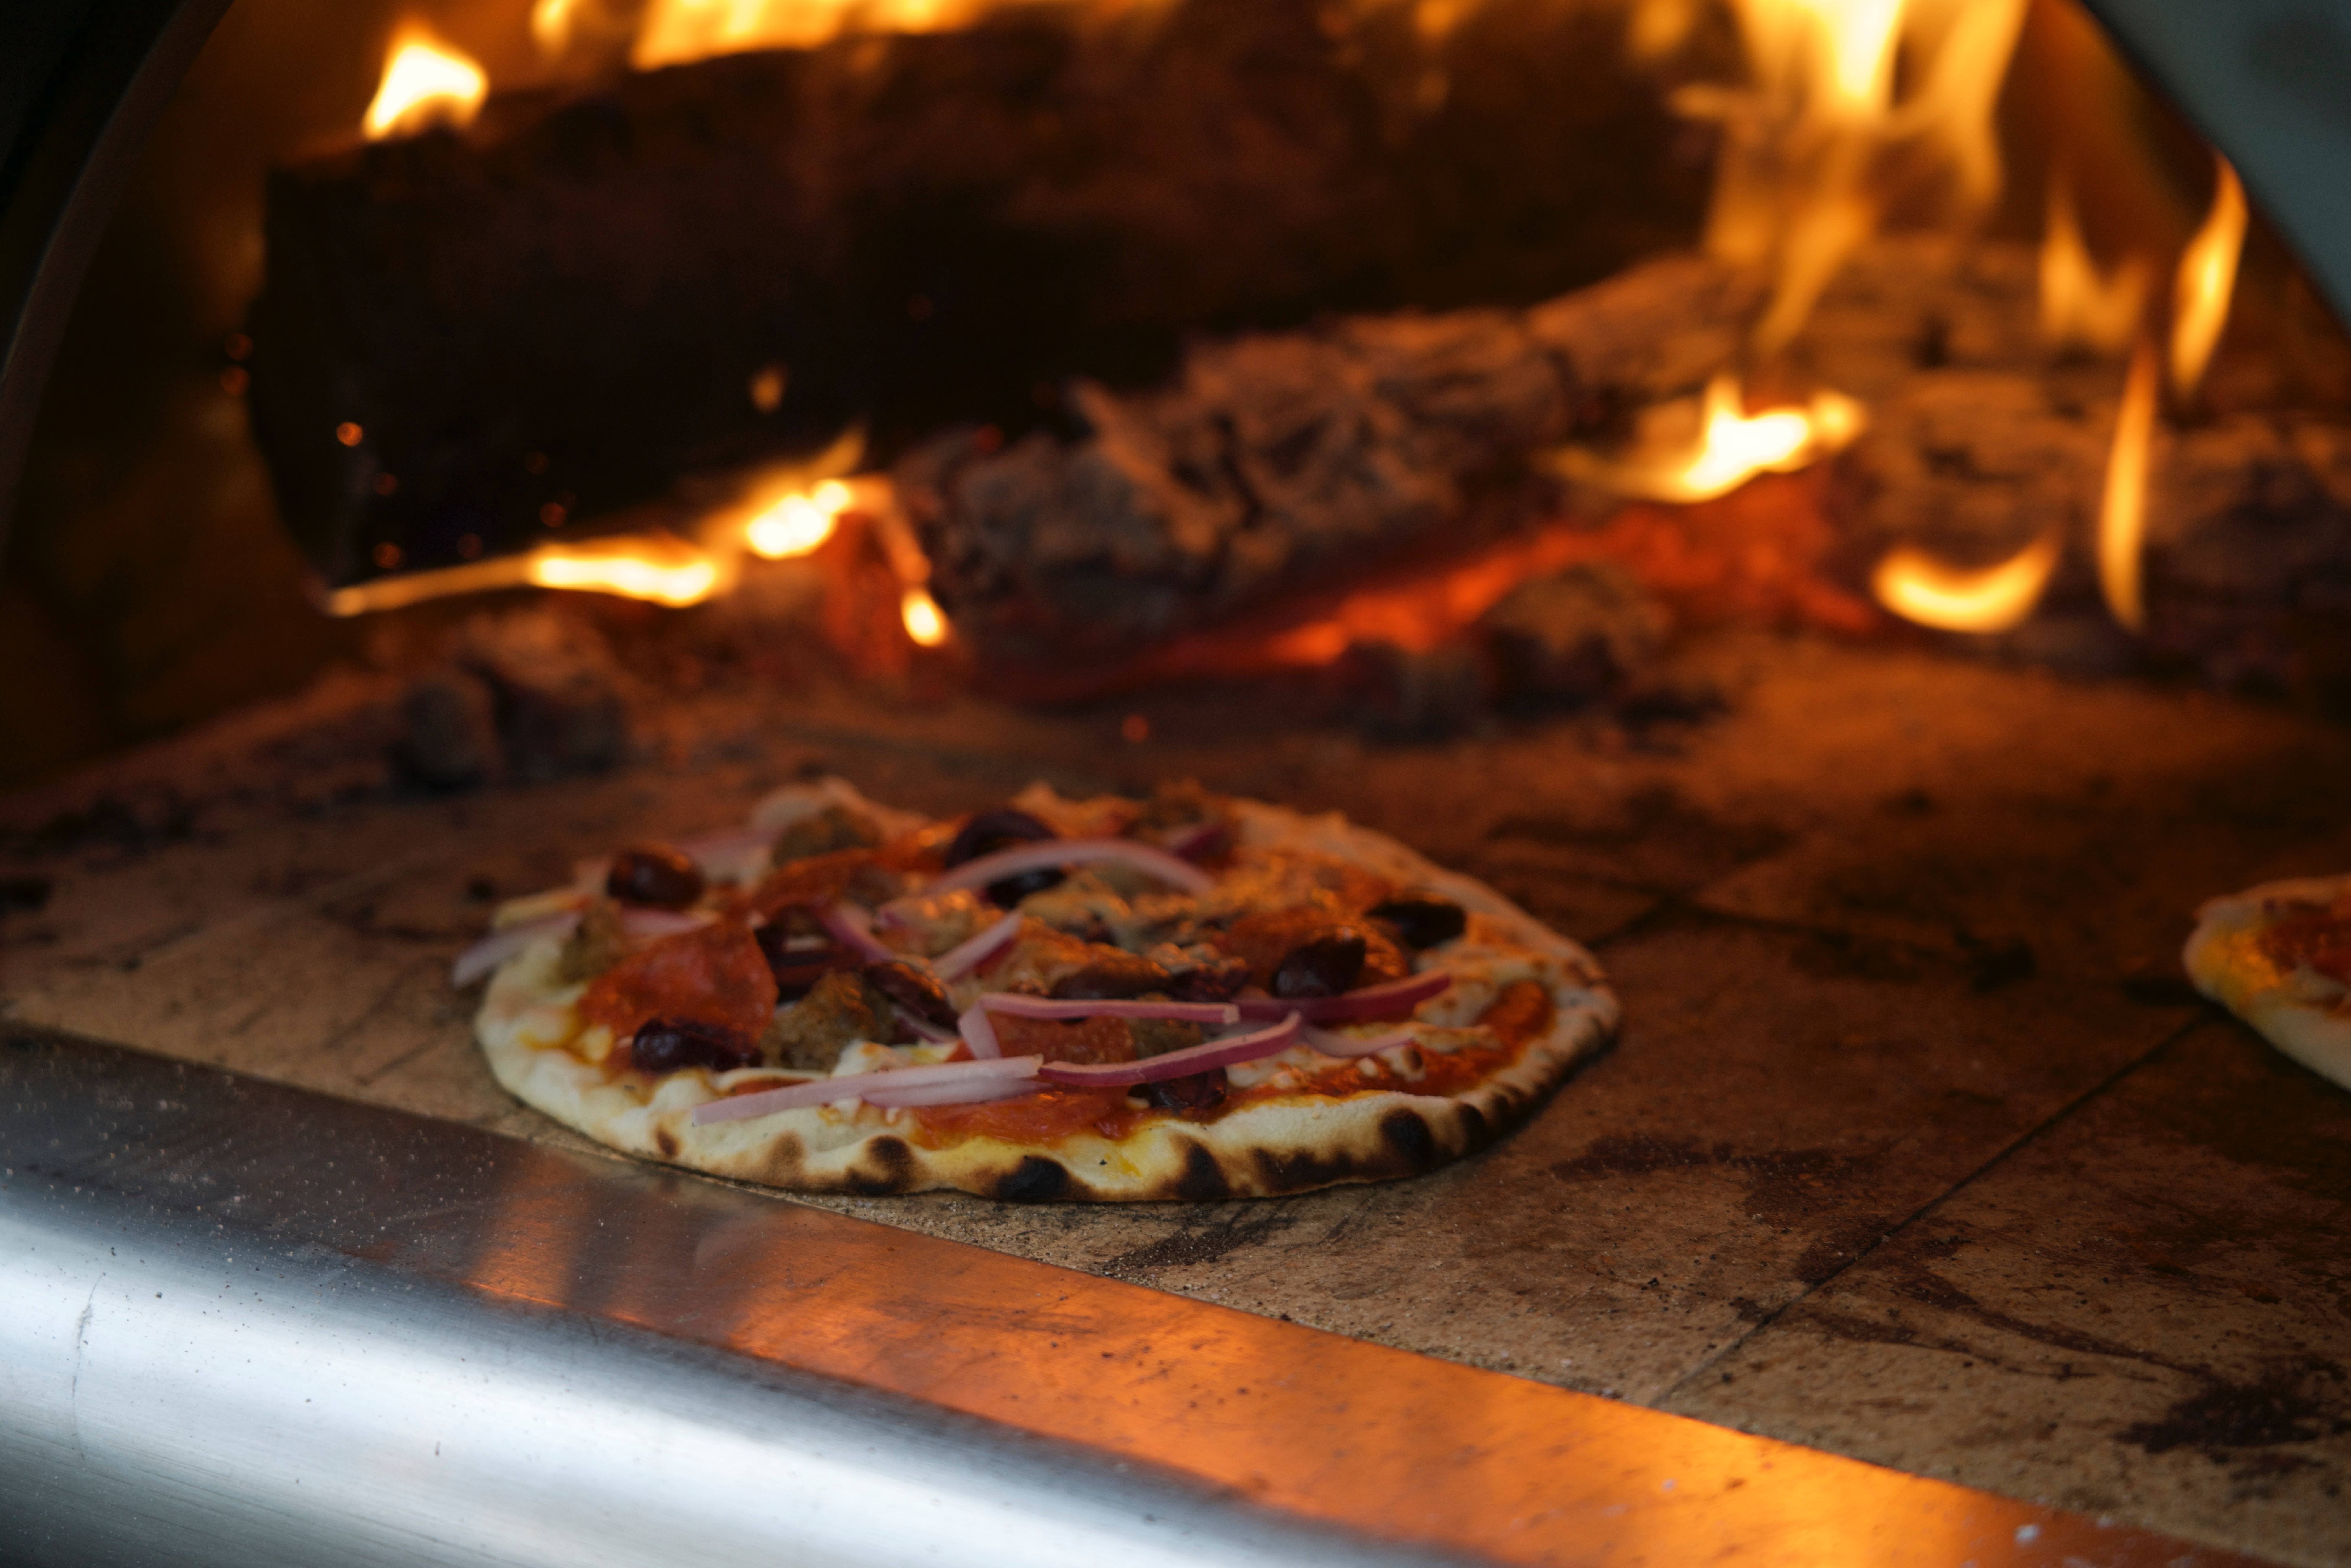 Your pizza is ready in 90 Seconds - buy it outside pizza oven- buitenpizzaovenkopen.nl